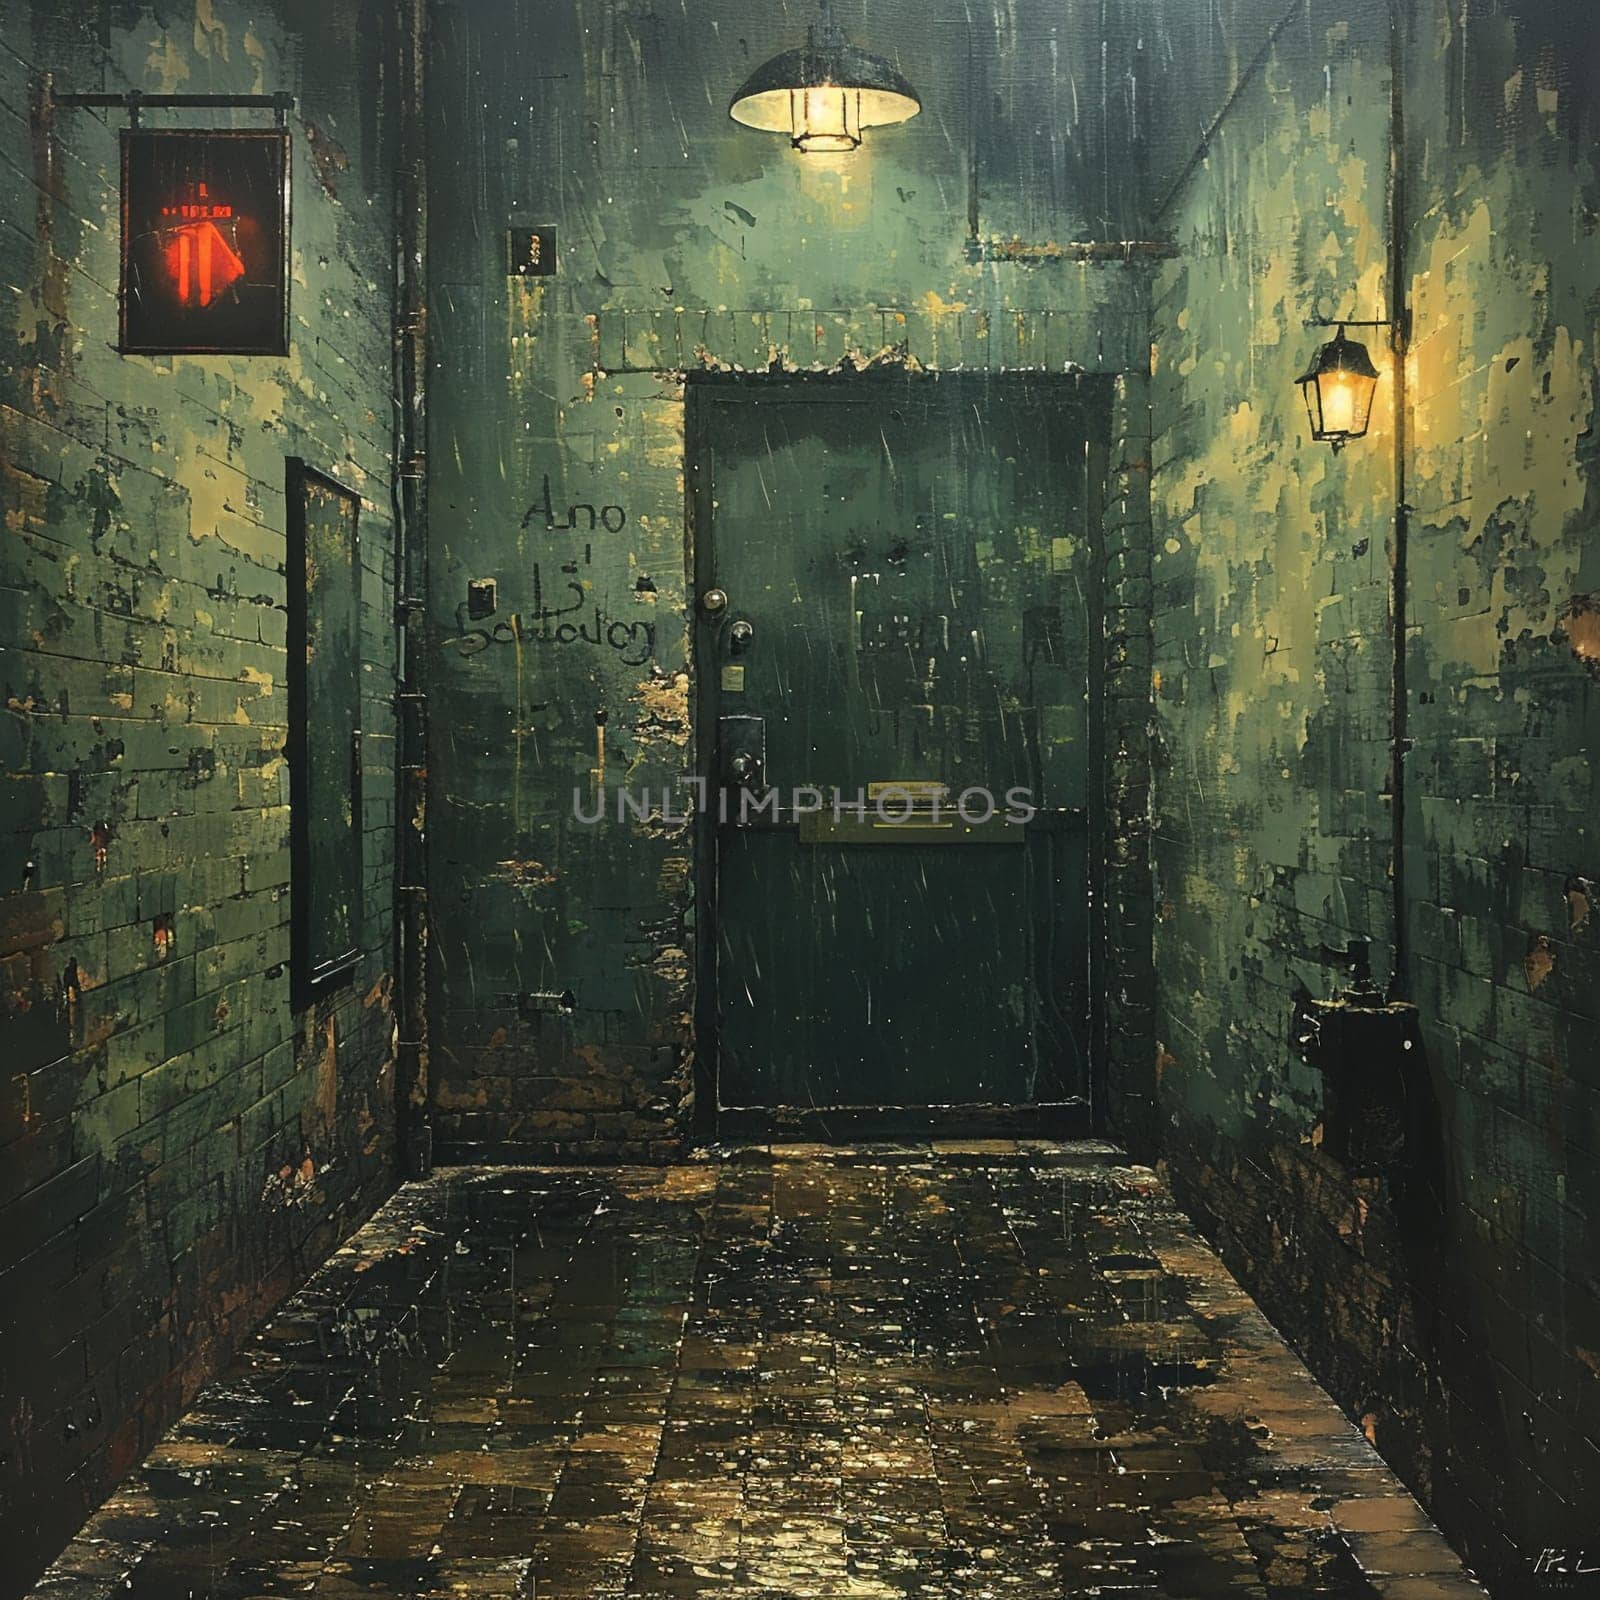 Alleyway sanctuary scene painted with a focus on soft lighting and quiet details in acrylics.